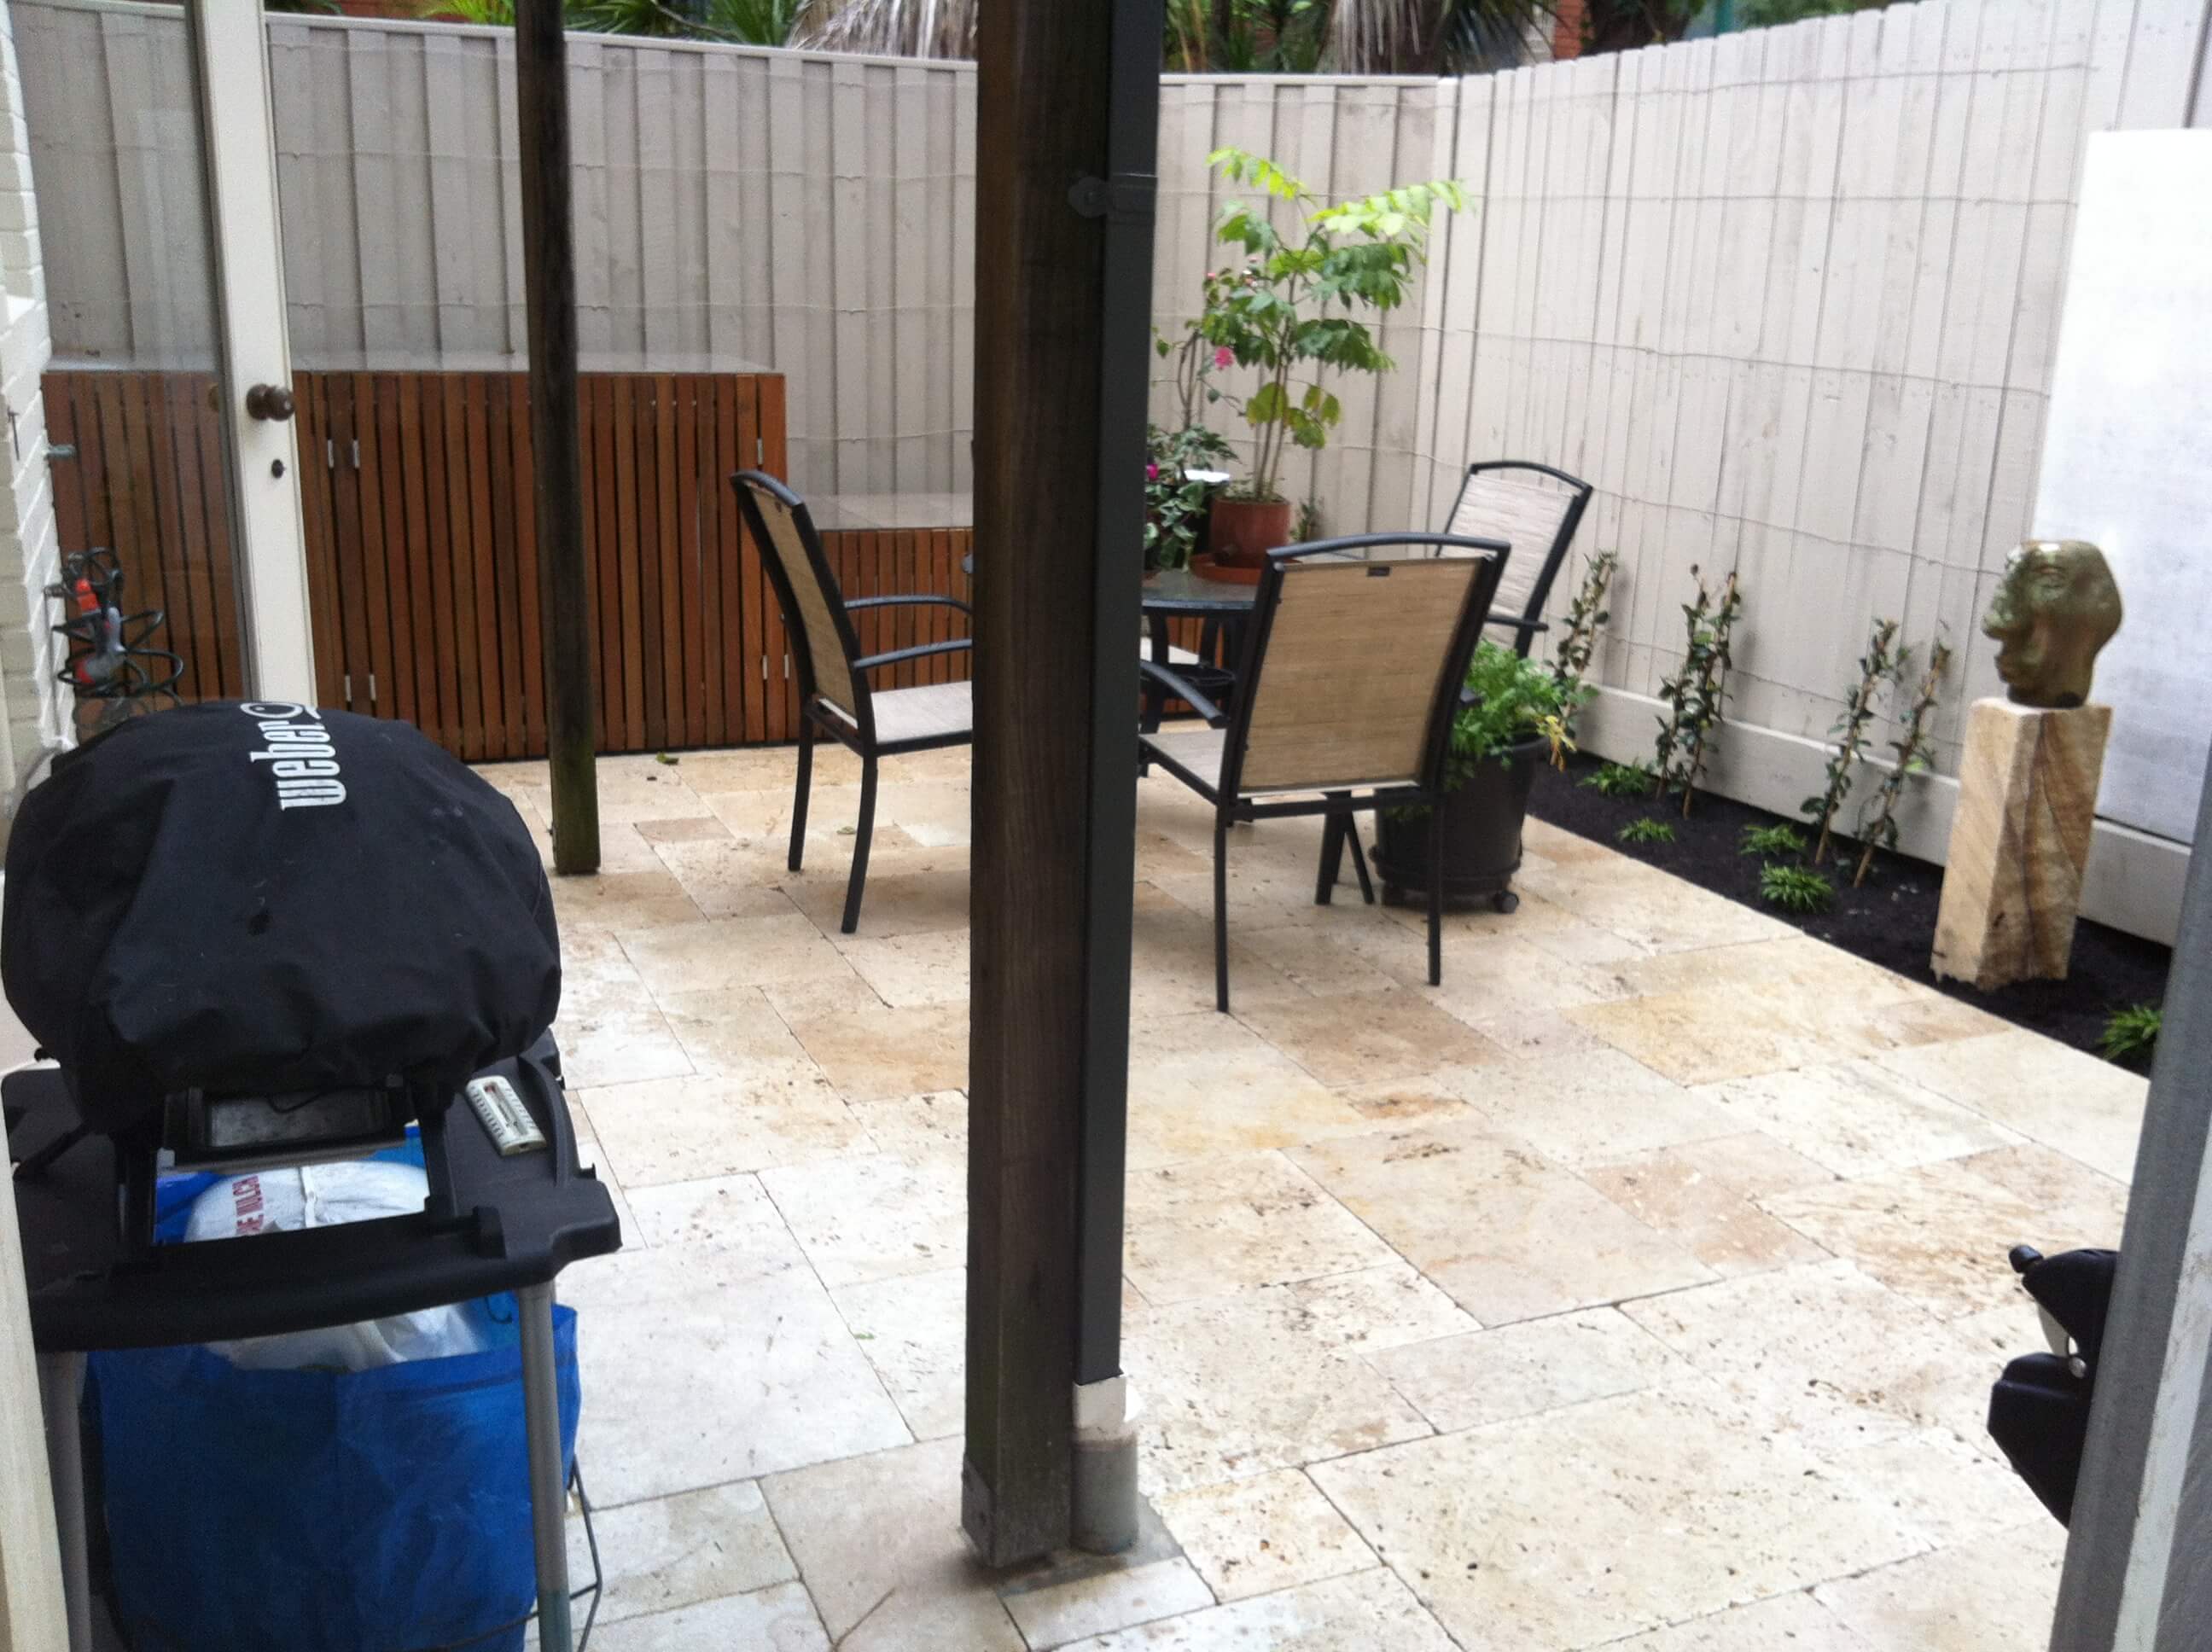 Paving, Fencing and Bin Storage in Glebe